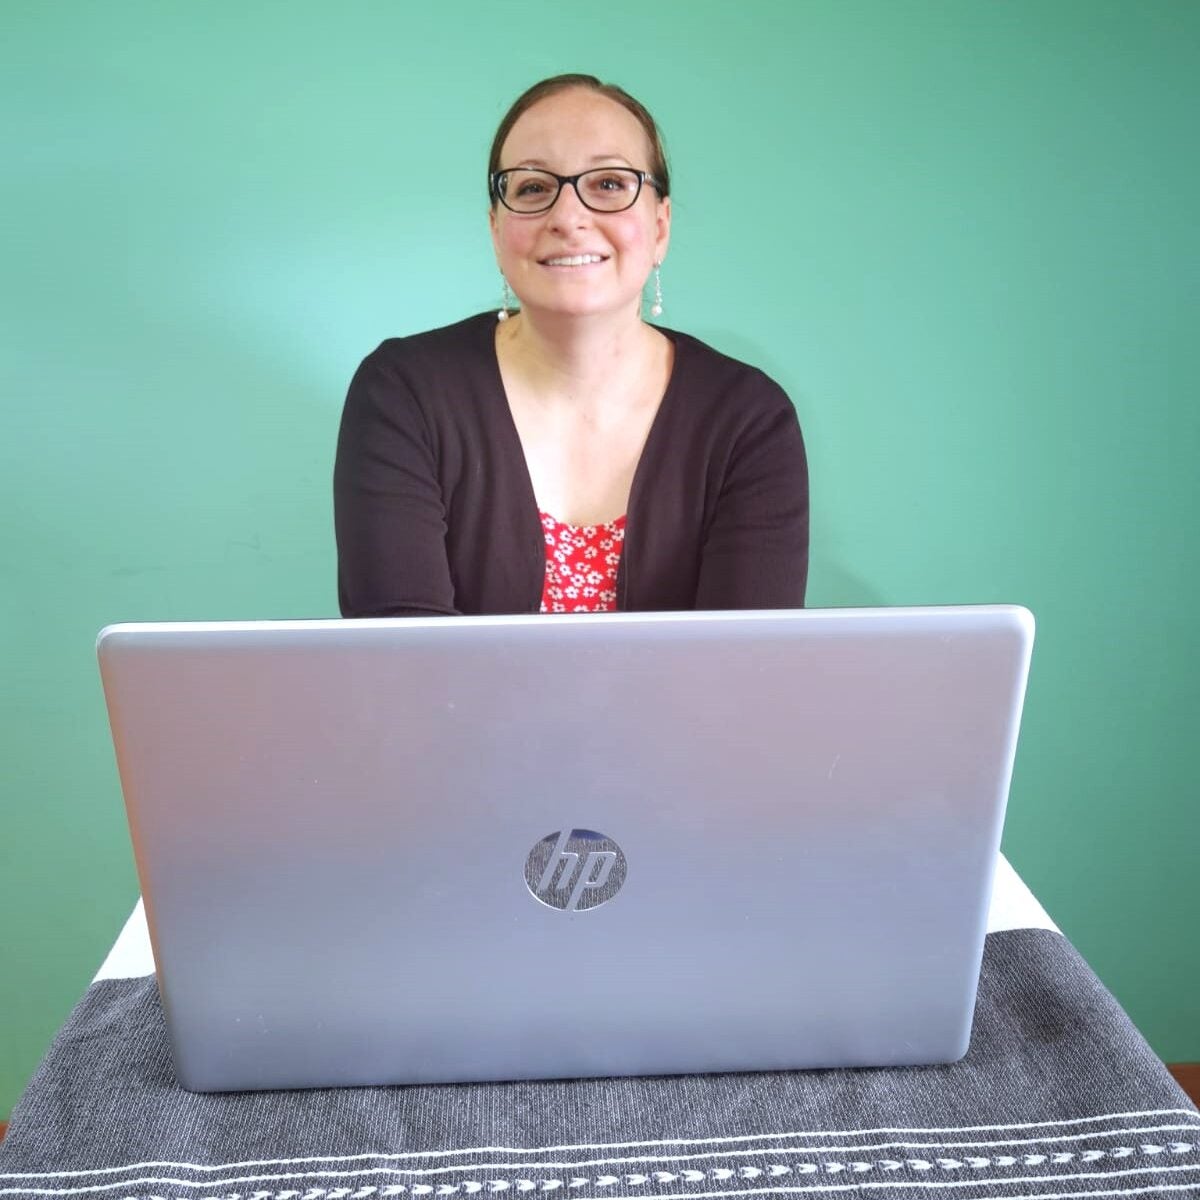 A medium shot of Virtual Educator Ashley Stamper sitting behind a laptop computer and smiling